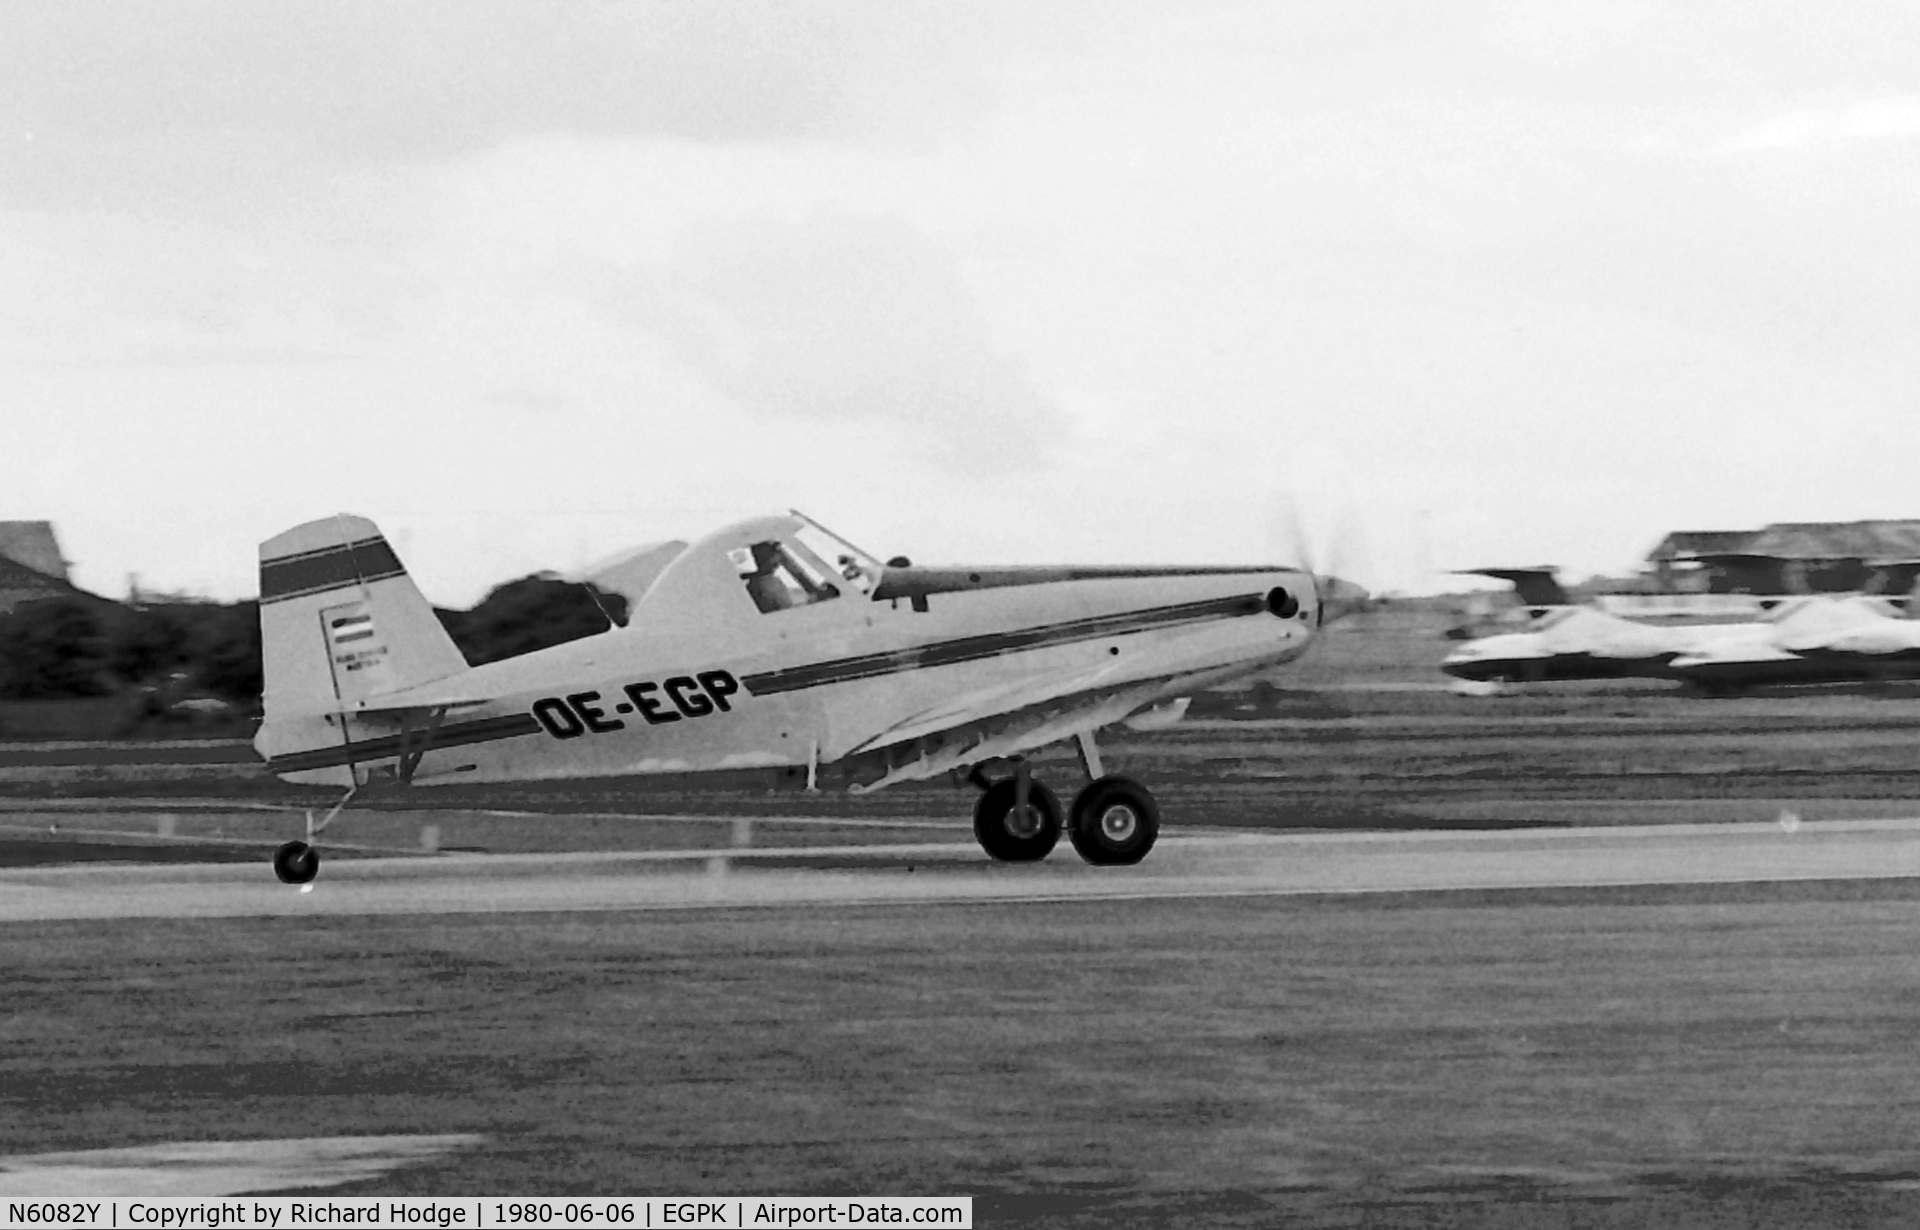 N6082Y, 1980 Air Tractor Inc AT-400 C/N 400-0273, When new as OE-EGP transiting through Prestwick in 1980  with 2 others. OE-EMP and OE-EYP.